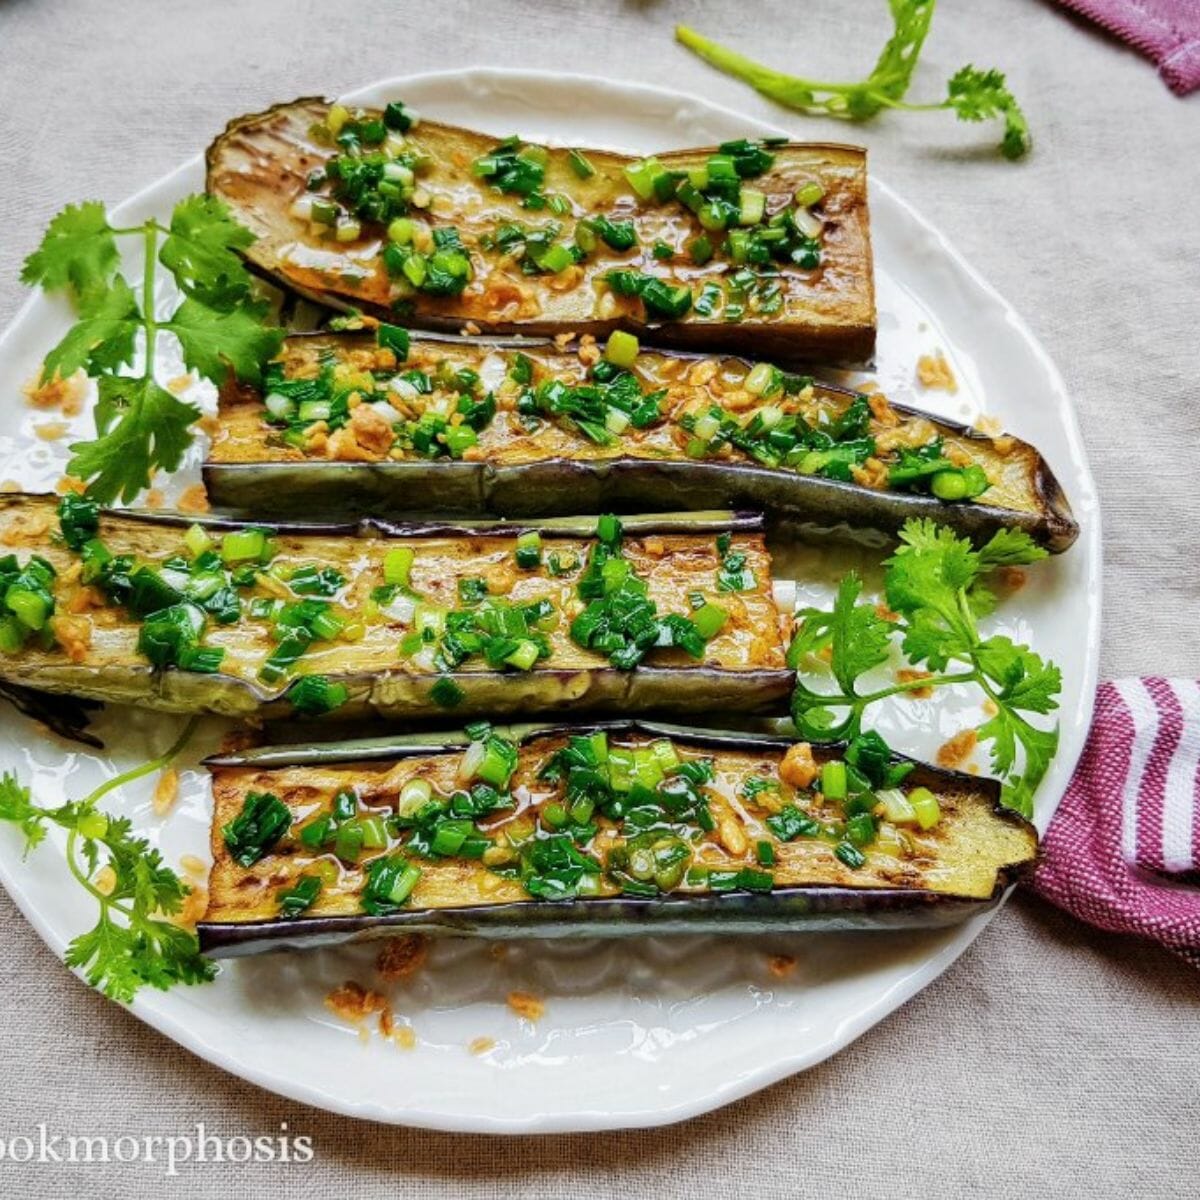 4 halves of grilled eggplants topped with green onion oil and cilantro